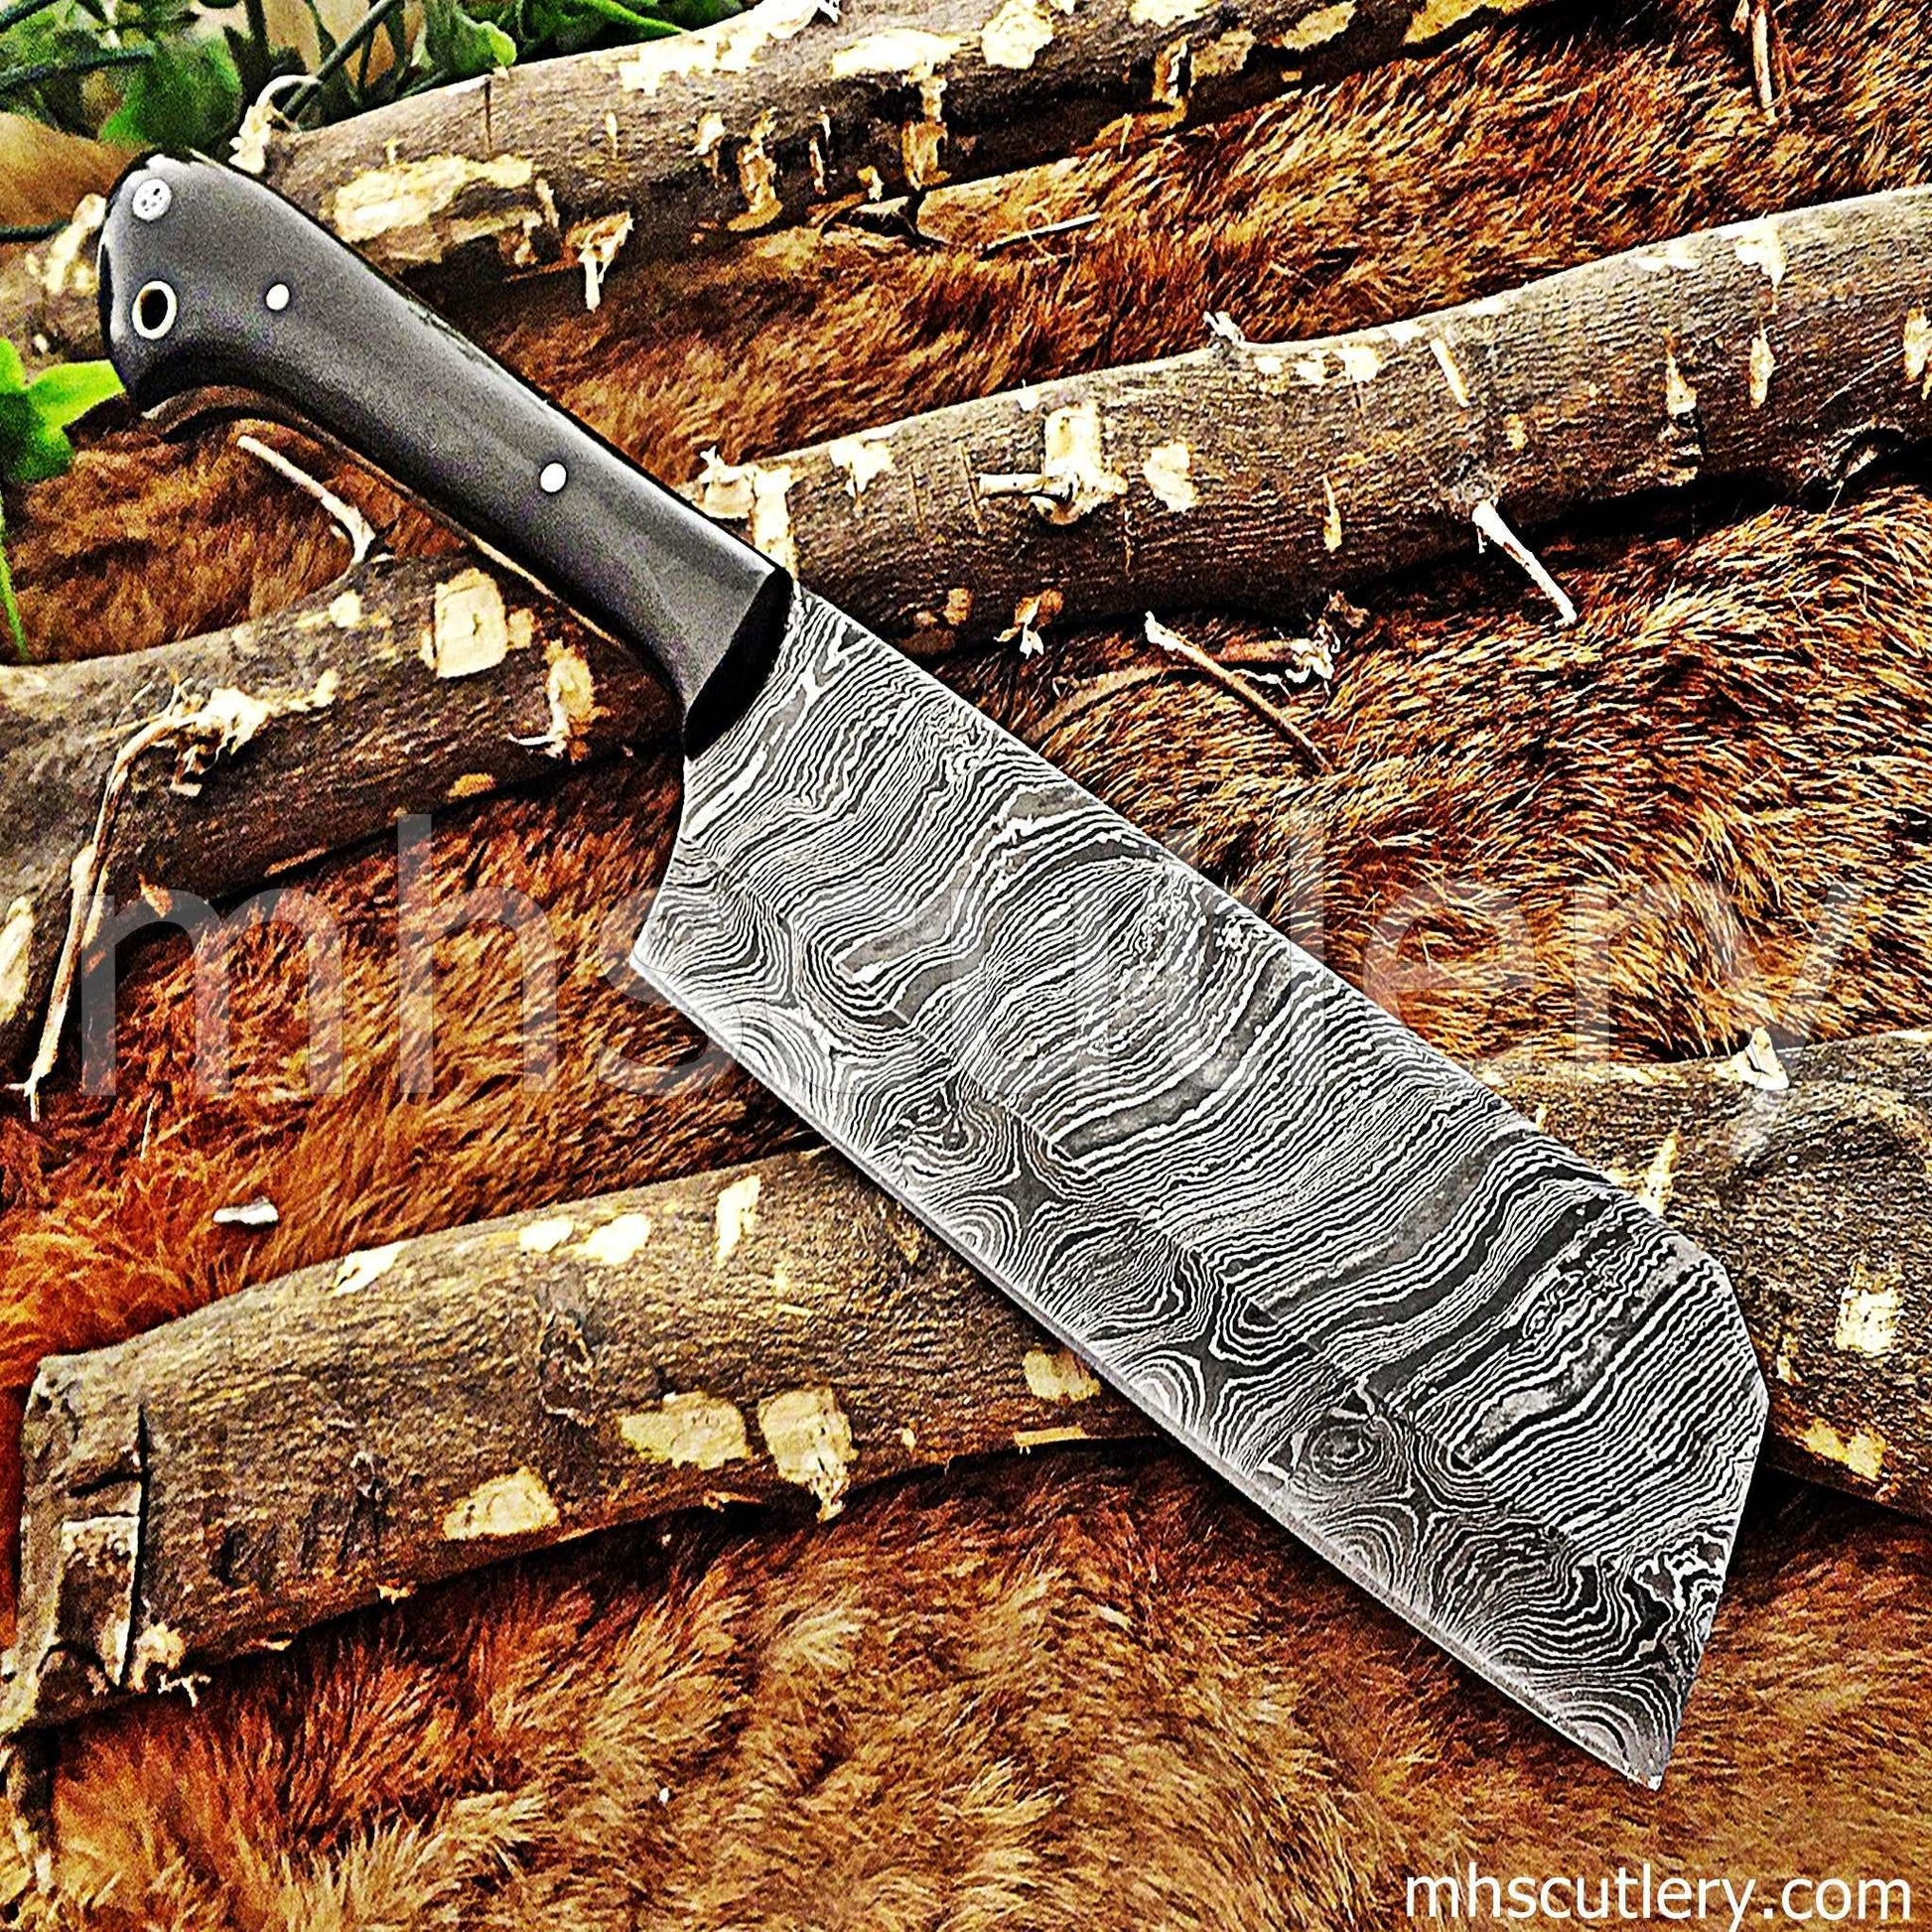 Custom Hand Forged Damascus Steel Meat Cleaver | mhscutlery